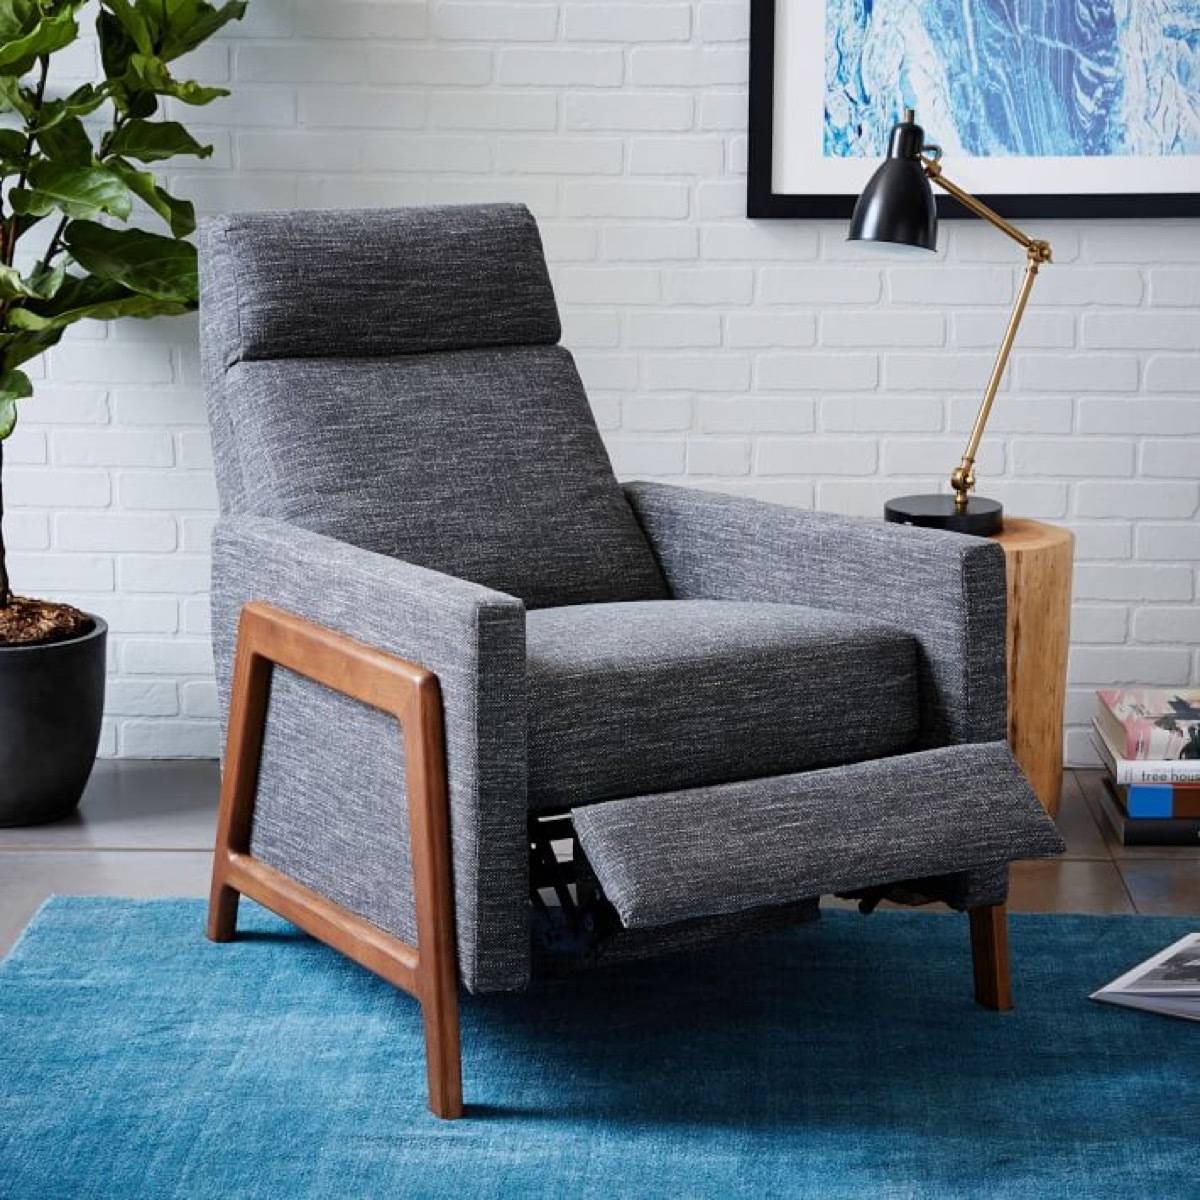 Get back pain relief from a recliner, like this gray one from West Elm